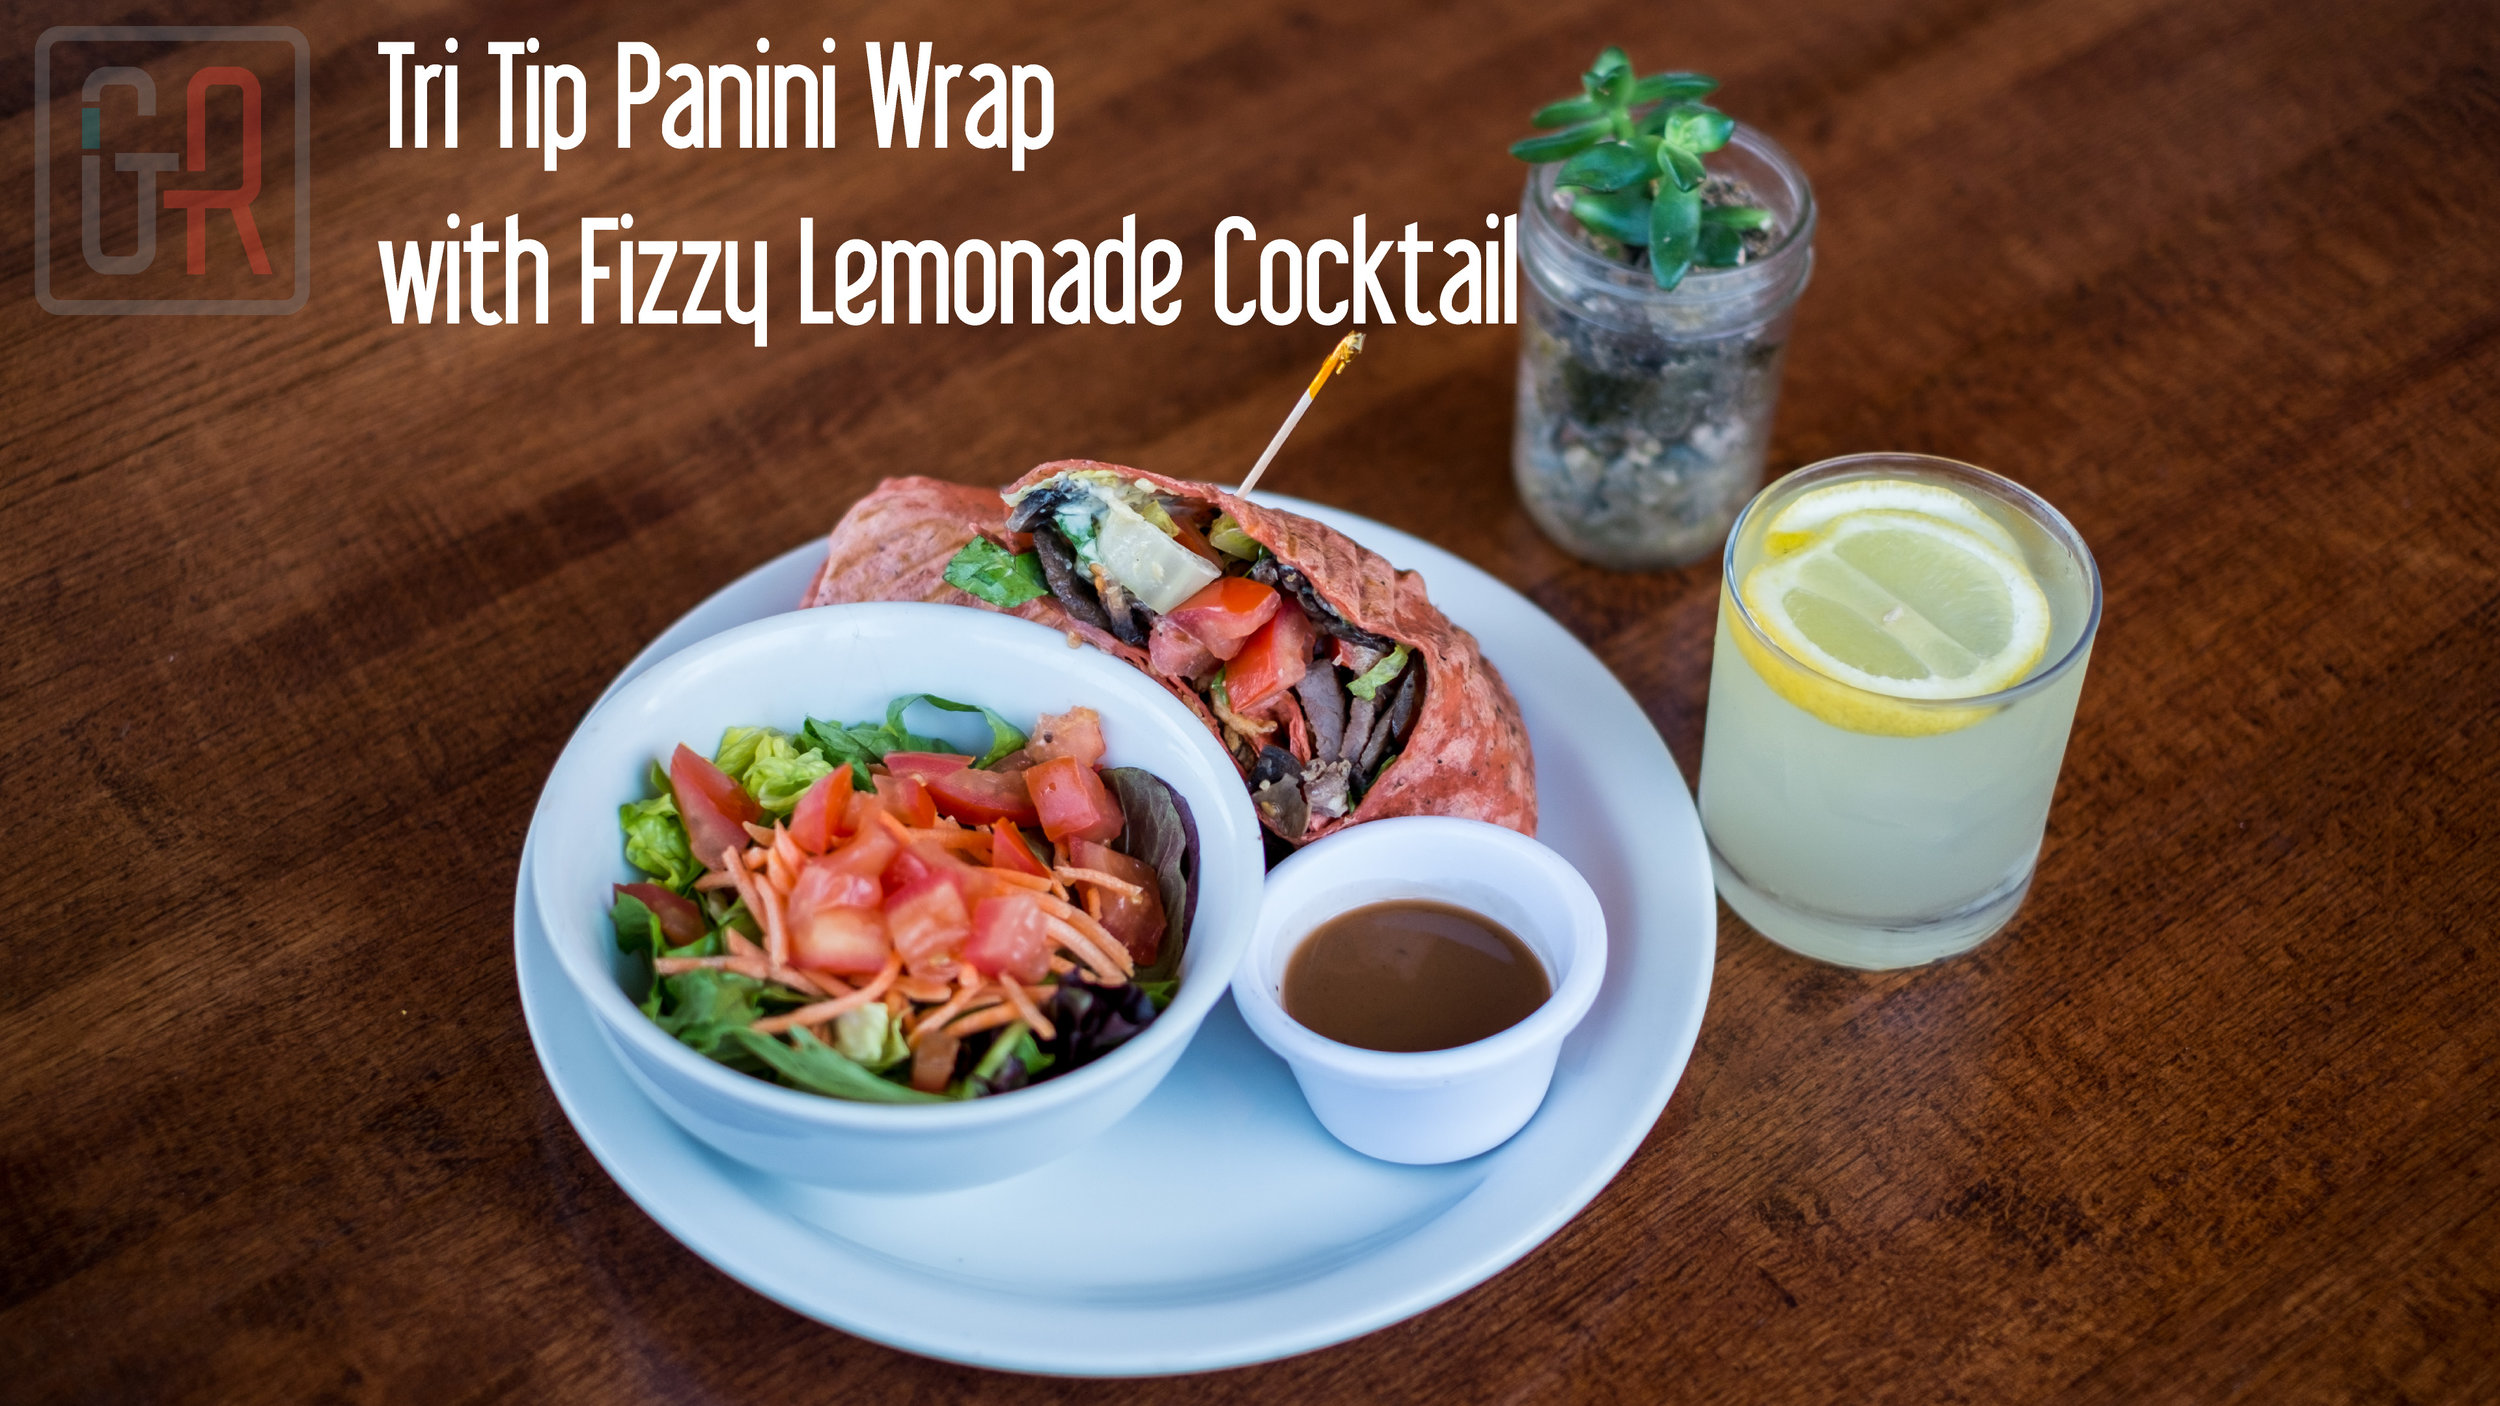 Tri-Tip-Panini-Wrap-with-Fizzy-Lemonade-Cocktail---Titled.jpg